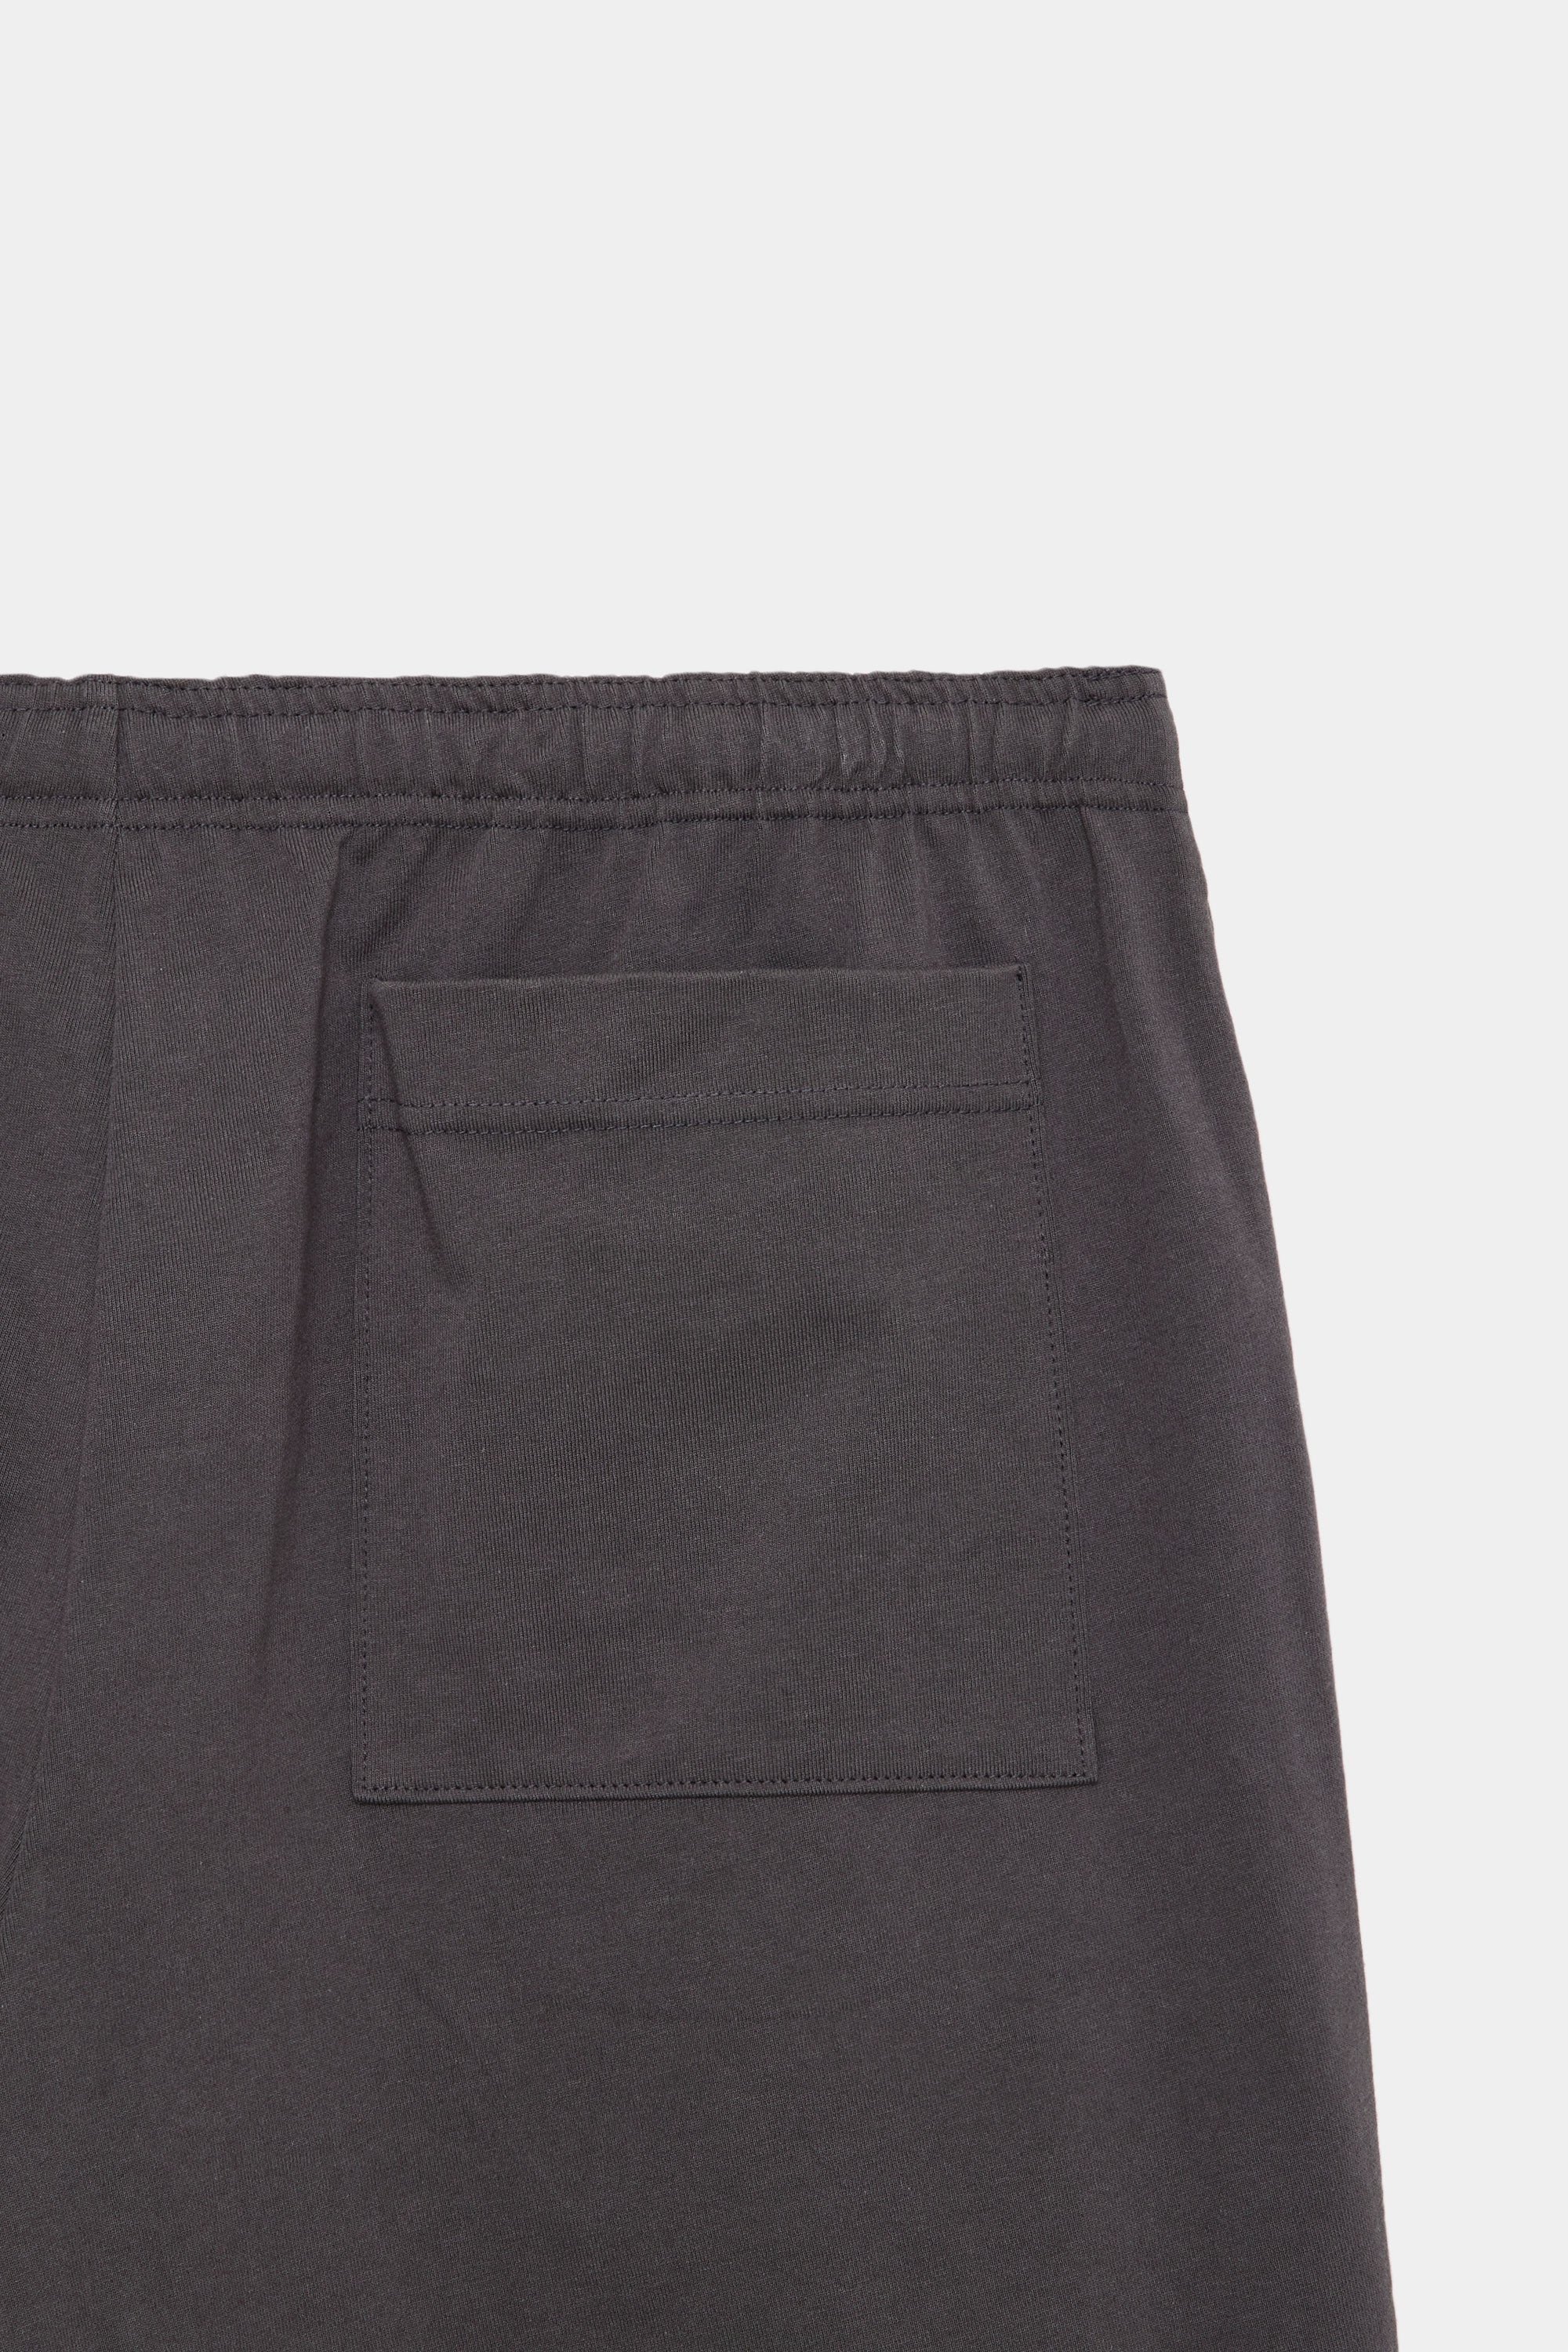 30//1 ORGANIC COTTON KNIT DOUBLE KNEE SHORTS, Charcoal